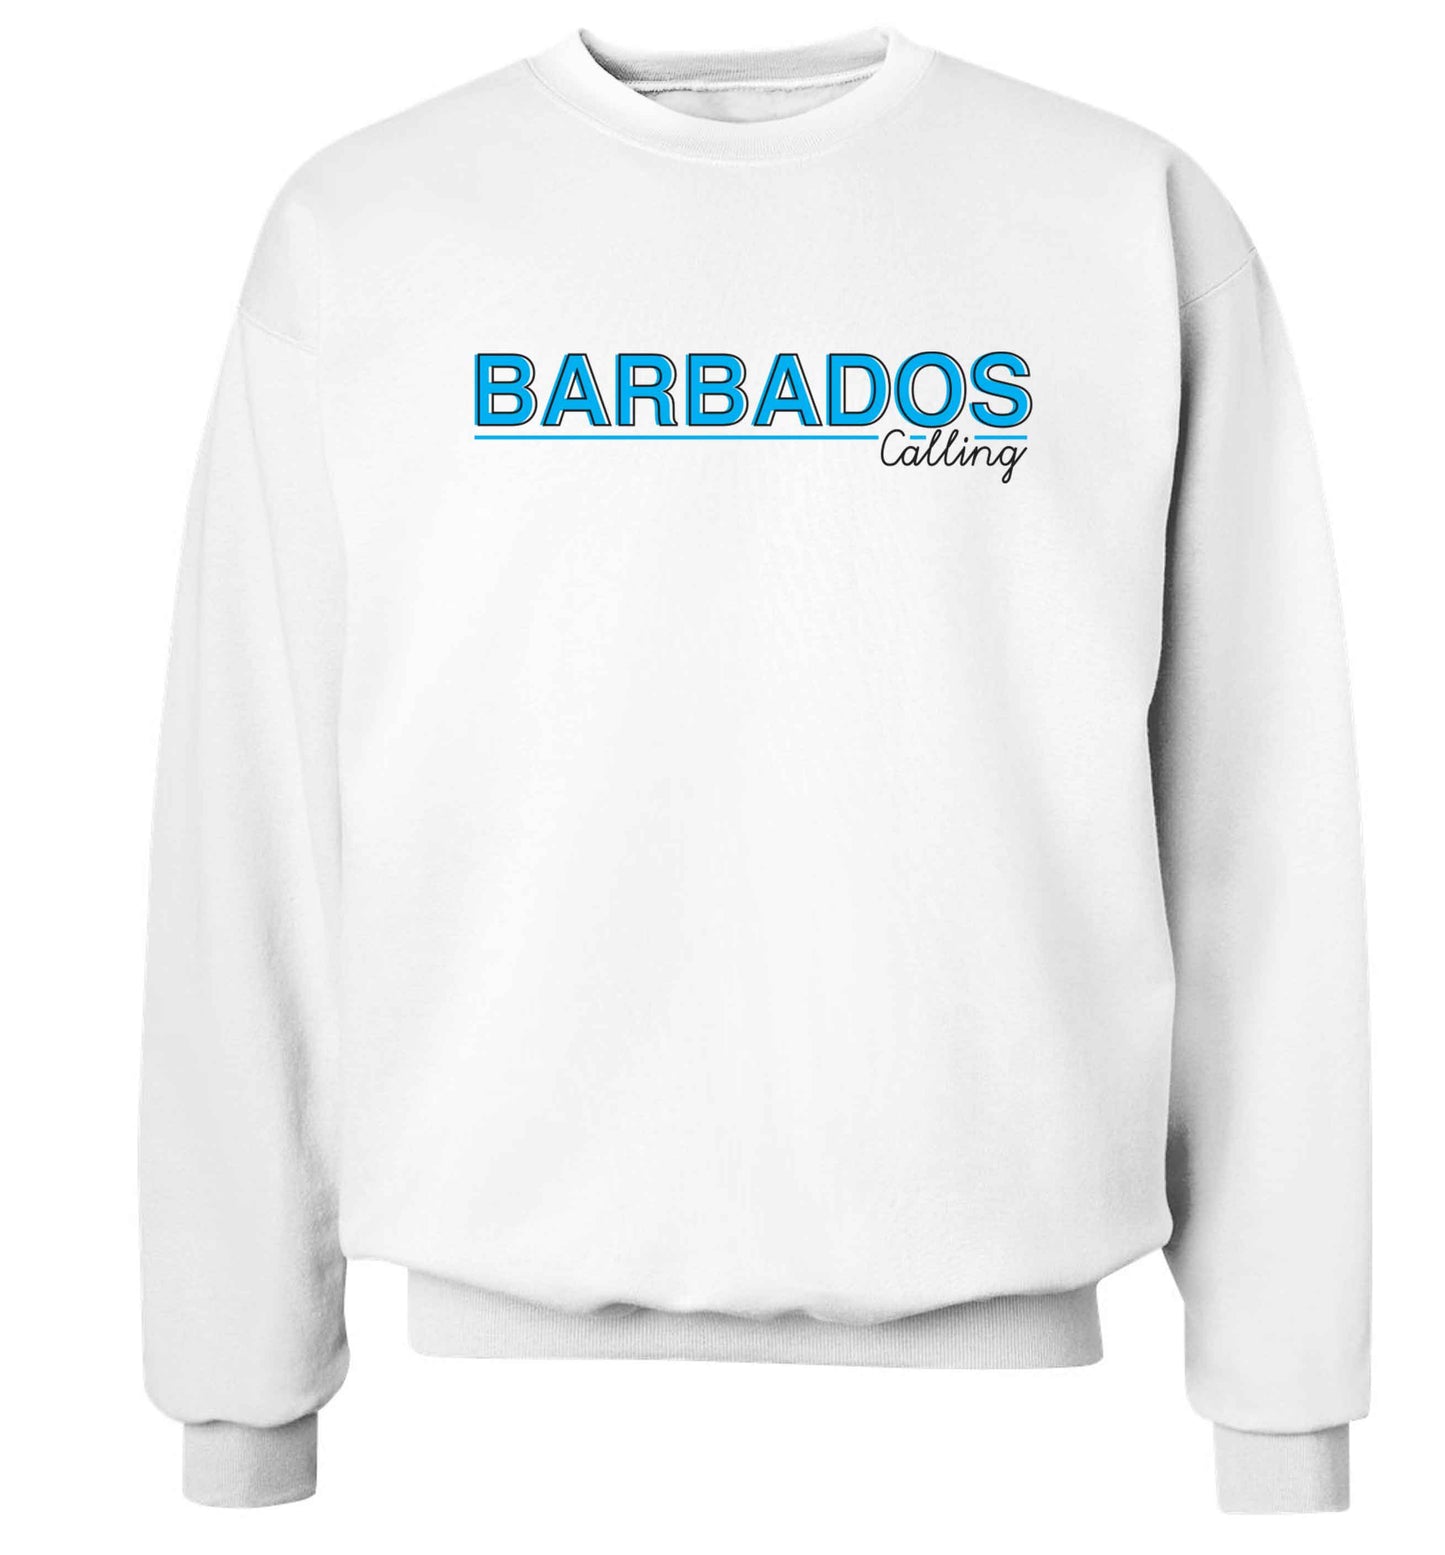 Barbados calling Adult's unisex white Sweater 2XL